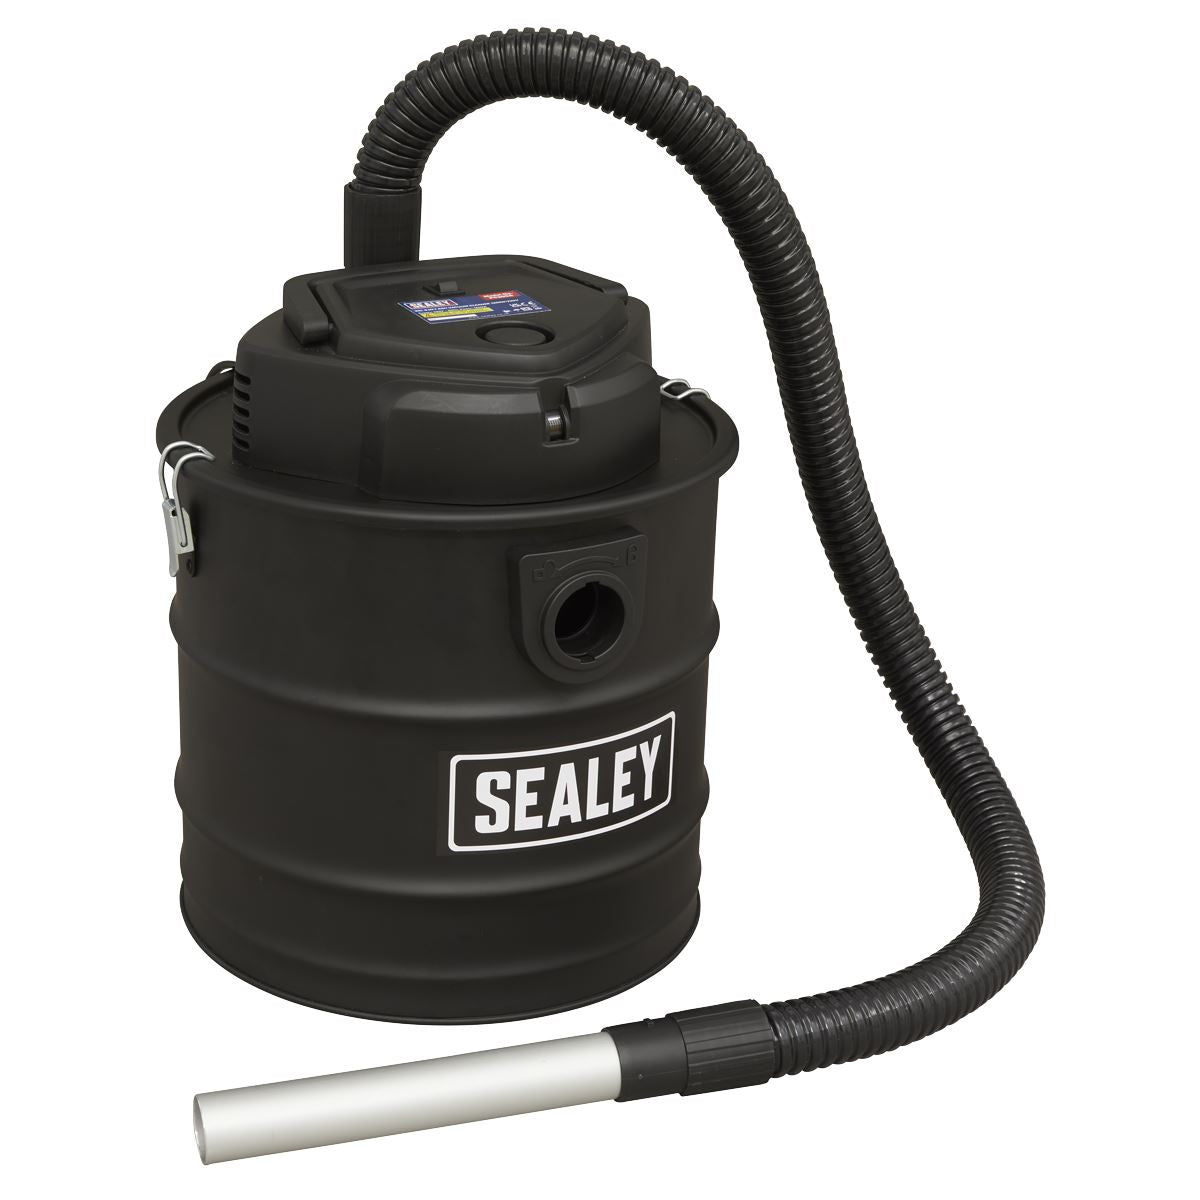 Sealey 3-in-1 Ash Vacuum Cleaner 20L 1200W/230V